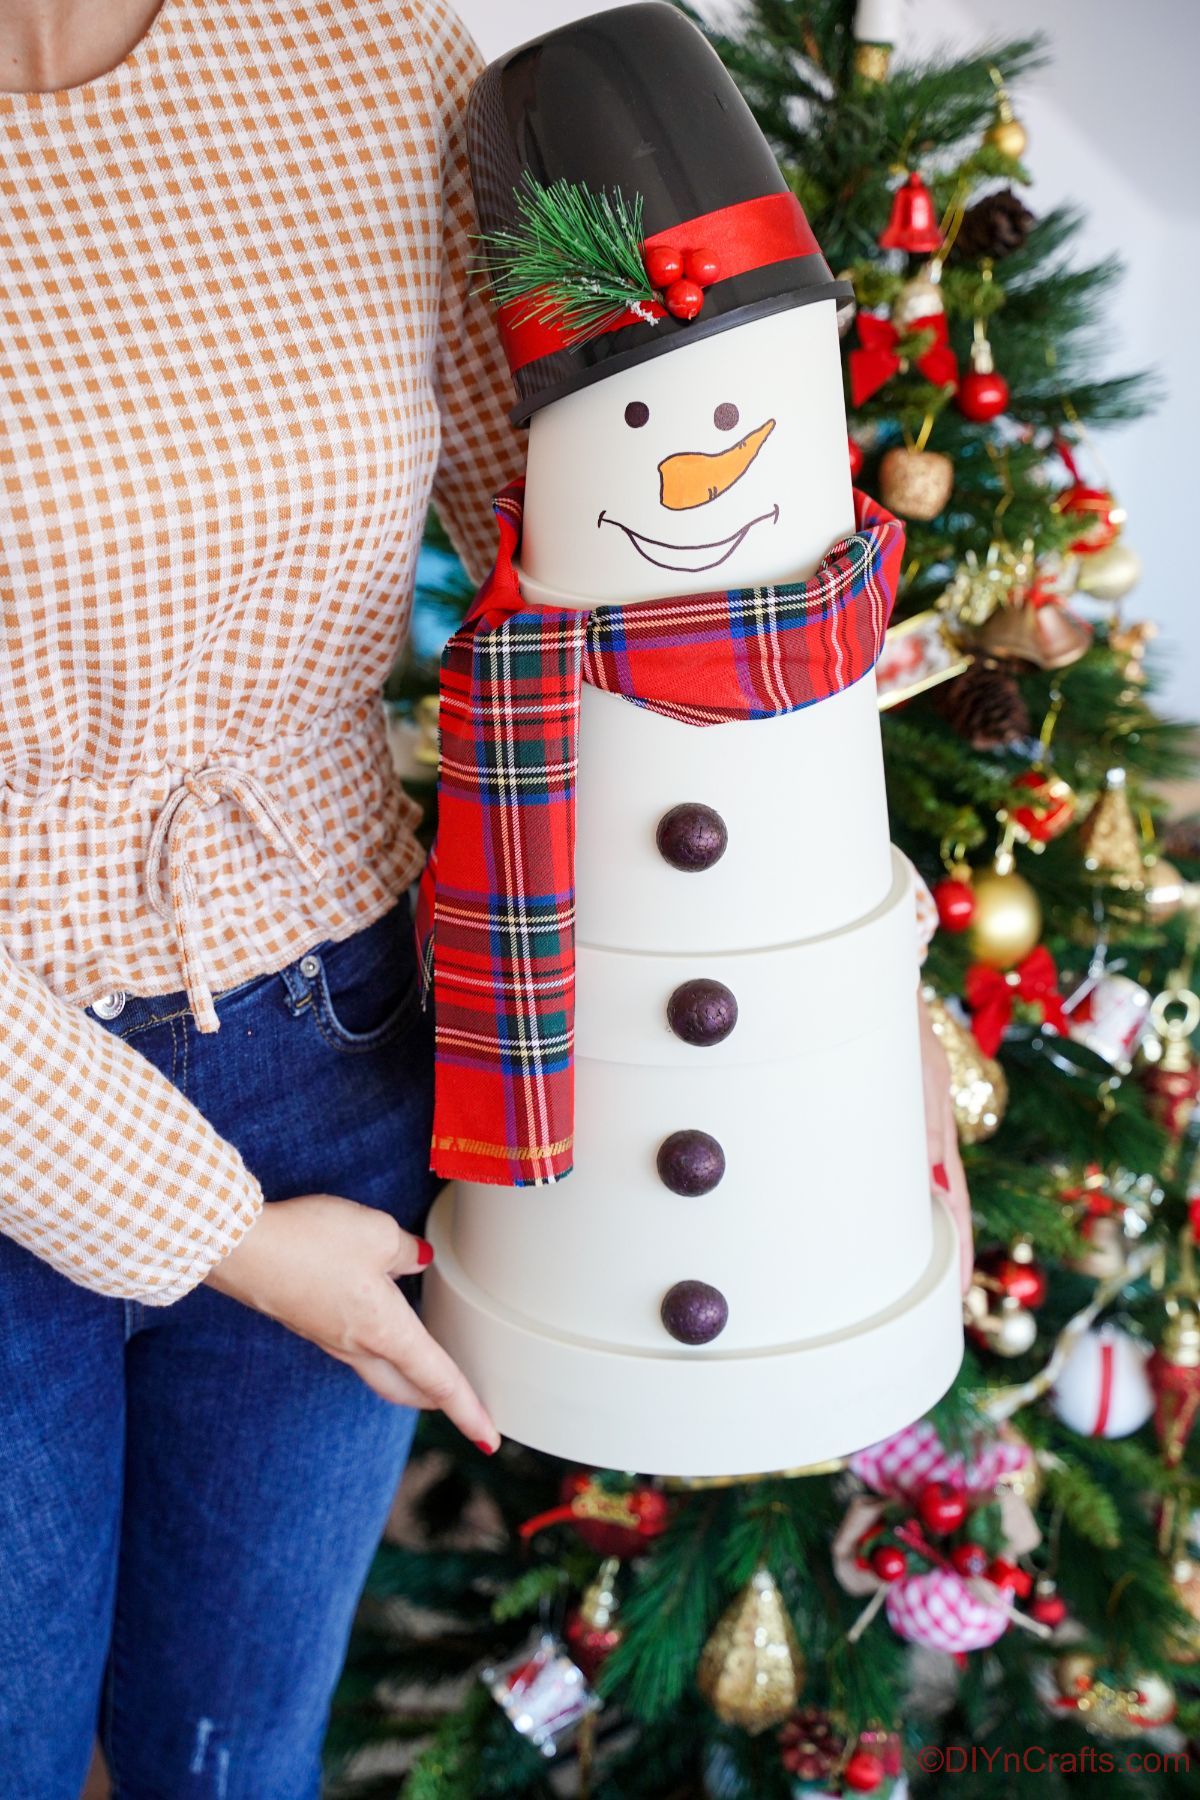 woman in jeans and peach shirt holding white clay pot snowman with red plaid scarf